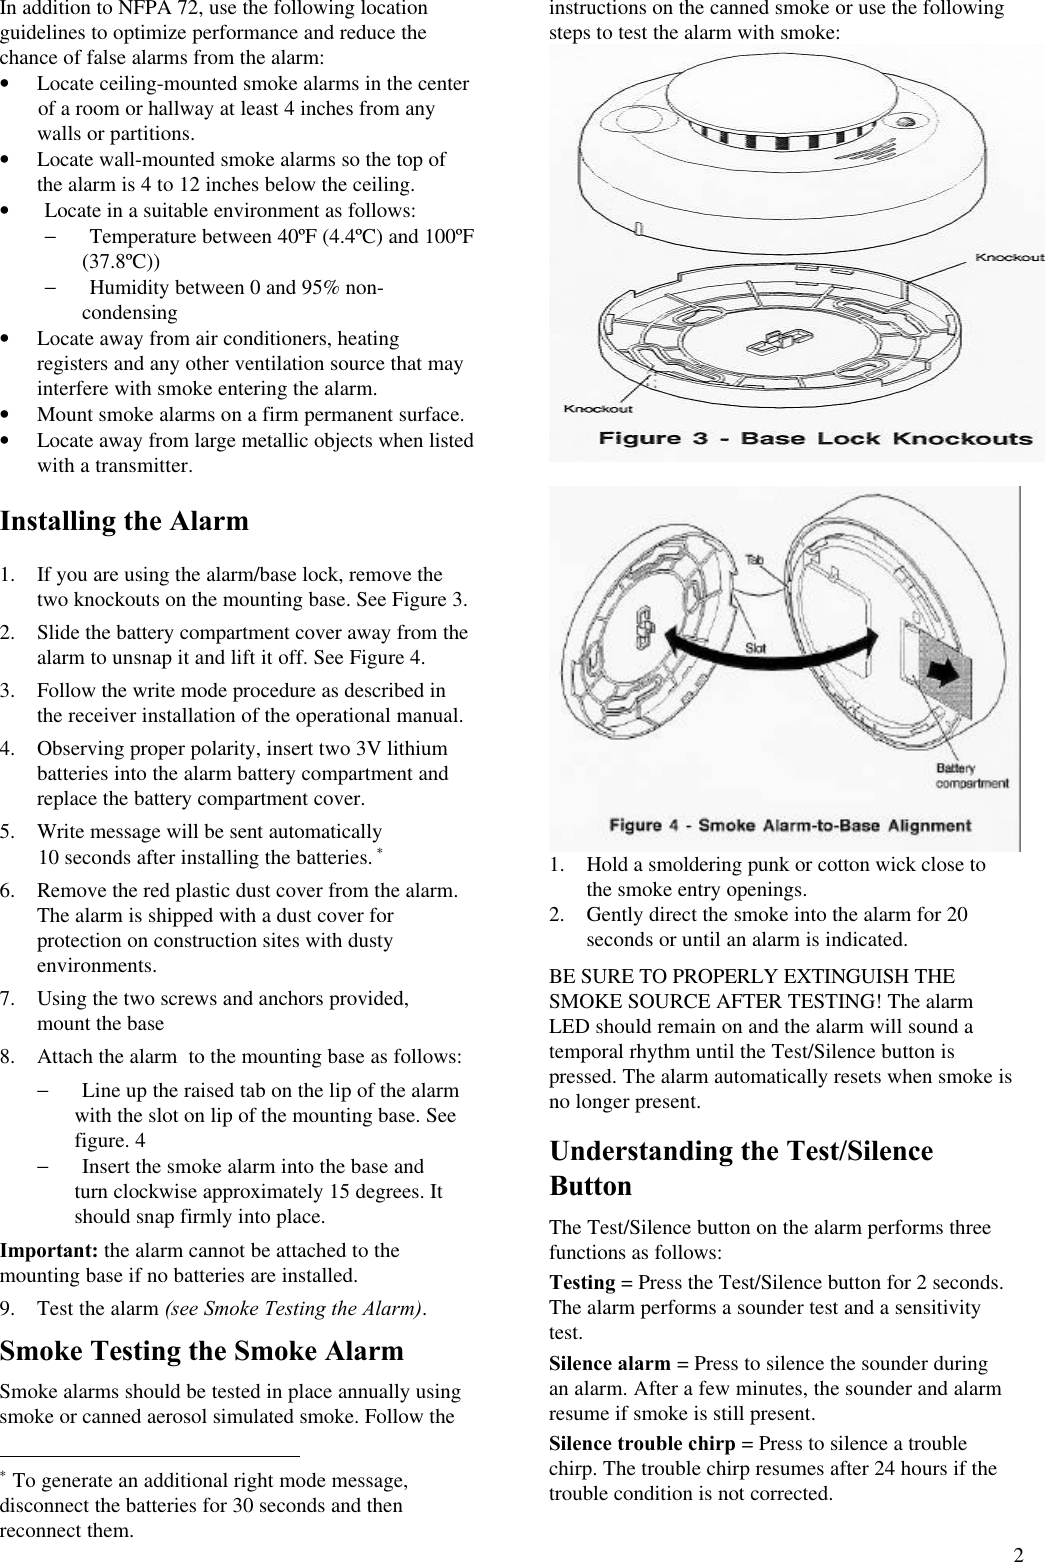 2In addition to NFPA 72, use the following locationguidelines to optimize performance and reduce thechance of false alarms from the alarm:• Locate ceiling-mounted smoke alarms in the center       of a room or hallway at least 4 inches from anywalls or partitions.• Locate wall-mounted smoke alarms so the top ofthe alarm is 4 to 12 inches below the ceiling.• Locate in a suitable environment as follows:− Temperature between 40ºF (4.4ºC) and 100ºF(37.8ºC))− Humidity between 0 and 95% non-condensing• Locate away from air conditioners, heatingregisters and any other ventilation source that mayinterfere with smoke entering the alarm.• Mount smoke alarms on a firm permanent surface.• Locate away from large metallic objects when listedwith a transmitter.Installing the Alarm1. If you are using the alarm/base lock, remove thetwo knockouts on the mounting base. See Figure 3. 2. Slide the battery compartment cover away from thealarm to unsnap it and lift it off. See Figure 4. 3. Follow the write mode procedure as described inthe receiver installation of the operational manual. 4. Observing proper polarity, insert two 3V lithiumbatteries into the alarm battery compartment andreplace the battery compartment cover. 5. Write message will be sent automatically       10 seconds after installing the batteries. ∗ 6. Remove the red plastic dust cover from the alarm.The alarm is shipped with a dust cover forprotection on construction sites with dustyenvironments. 7. Using the two screws and anchors provided,mount the base 8. Attach the alarm  to the mounting base as follows:− Line up the raised tab on the lip of the alarmwith the slot on lip of the mounting base. Seefigure. 4− Insert the smoke alarm into the base andturn clockwise approximately 15 degrees. Itshould snap firmly into place.Important: the alarm cannot be attached to themounting base if no batteries are installed.9. Test the alarm (see Smoke Testing the Alarm).Smoke Testing the Smoke AlarmSmoke alarms should be tested in place annually usingsmoke or canned aerosol simulated smoke. Follow the                                                        ∗ To generate an additional right mode message,disconnect the batteries for 30 seconds and thenreconnect them.instructions on the canned smoke or use the followingsteps to test the alarm with smoke:1. Hold a smoldering punk or cotton wick close tothe smoke entry openings.2. Gently direct the smoke into the alarm for 20seconds or until an alarm is indicated.BE SURE TO PROPERLY EXTINGUISH THESMOKE SOURCE AFTER TESTING! The alarmLED should remain on and the alarm will sound atemporal rhythm until the Test/Silence button ispressed. The alarm automatically resets when smoke isno longer present.Understanding the Test/SilenceButtonThe Test/Silence button on the alarm performs threefunctions as follows:Testing = Press the Test/Silence button for 2 seconds.The alarm performs a sounder test and a sensitivitytest.Silence alarm = Press to silence the sounder duringan alarm. After a few minutes, the sounder and alarmresume if smoke is still present.Silence trouble chirp = Press to silence a troublechirp. The trouble chirp resumes after 24 hours if thetrouble condition is not corrected.